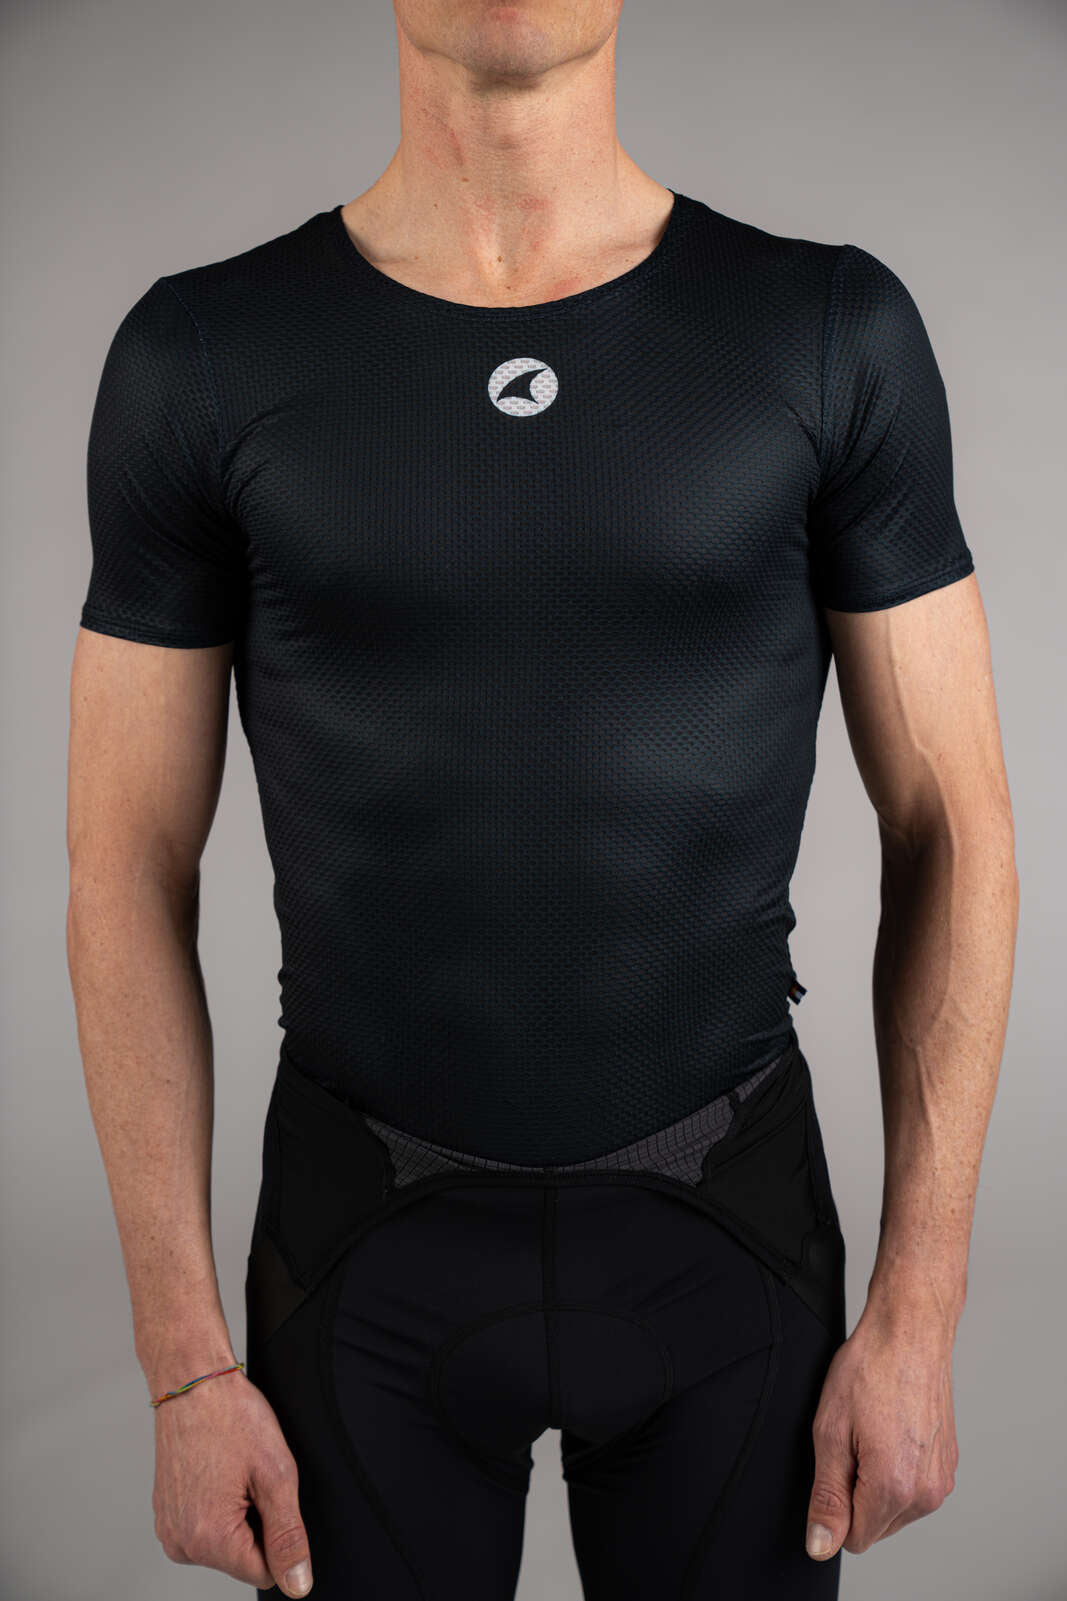 Men's Navy Blue Mesh Cycling Base Layer - Front Close-Up